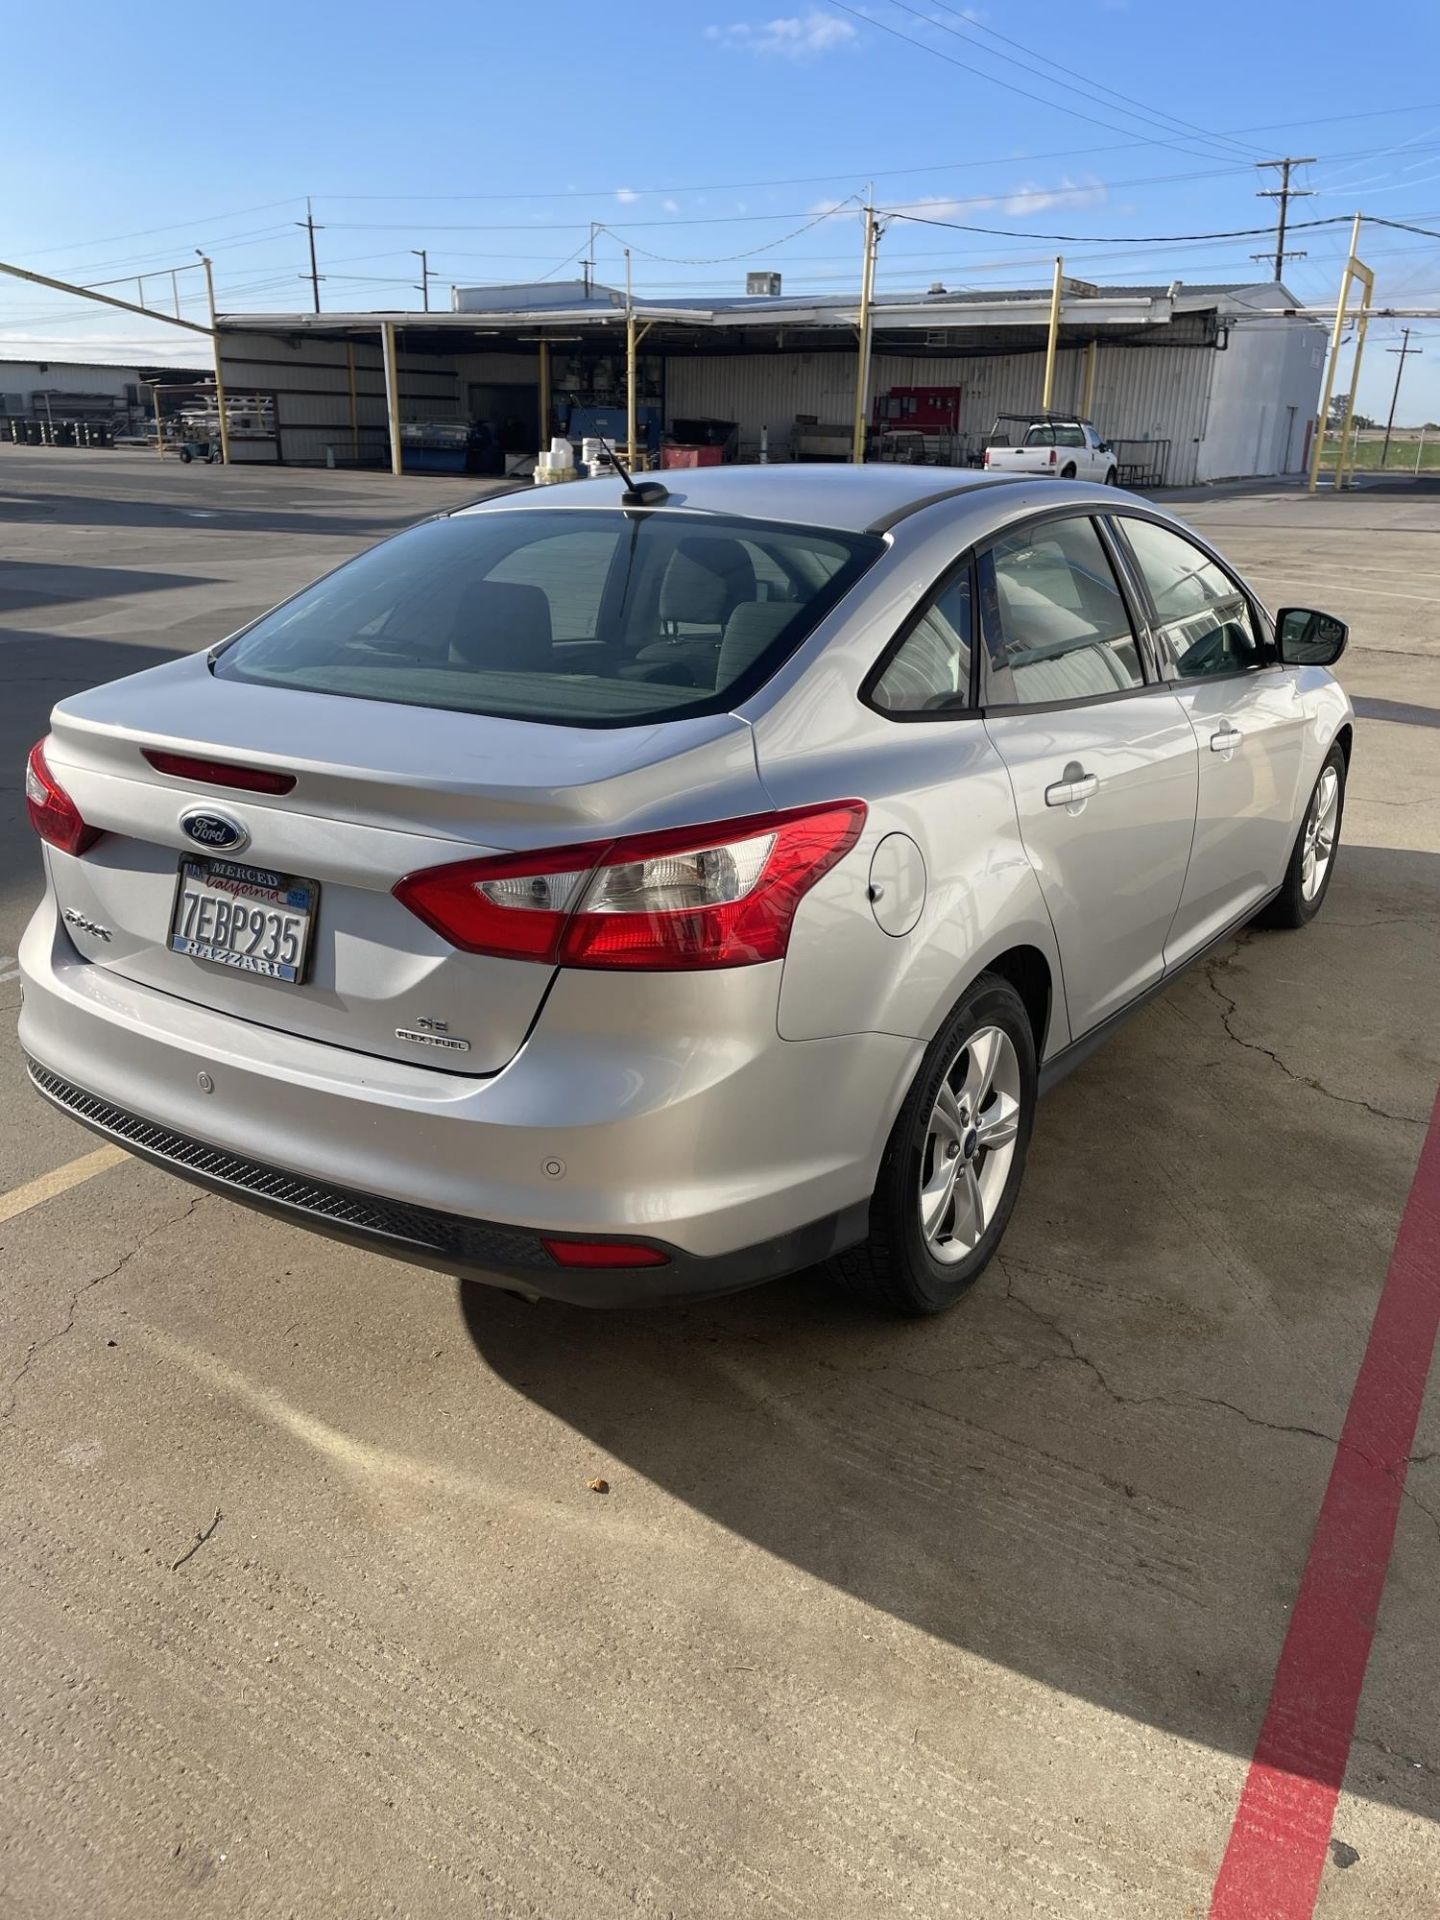 2014 Ford Focus (Silver), VIN#: 1FADP3F24EL118569 (LOCATED IN ATWATER, CA) - Image 2 of 2